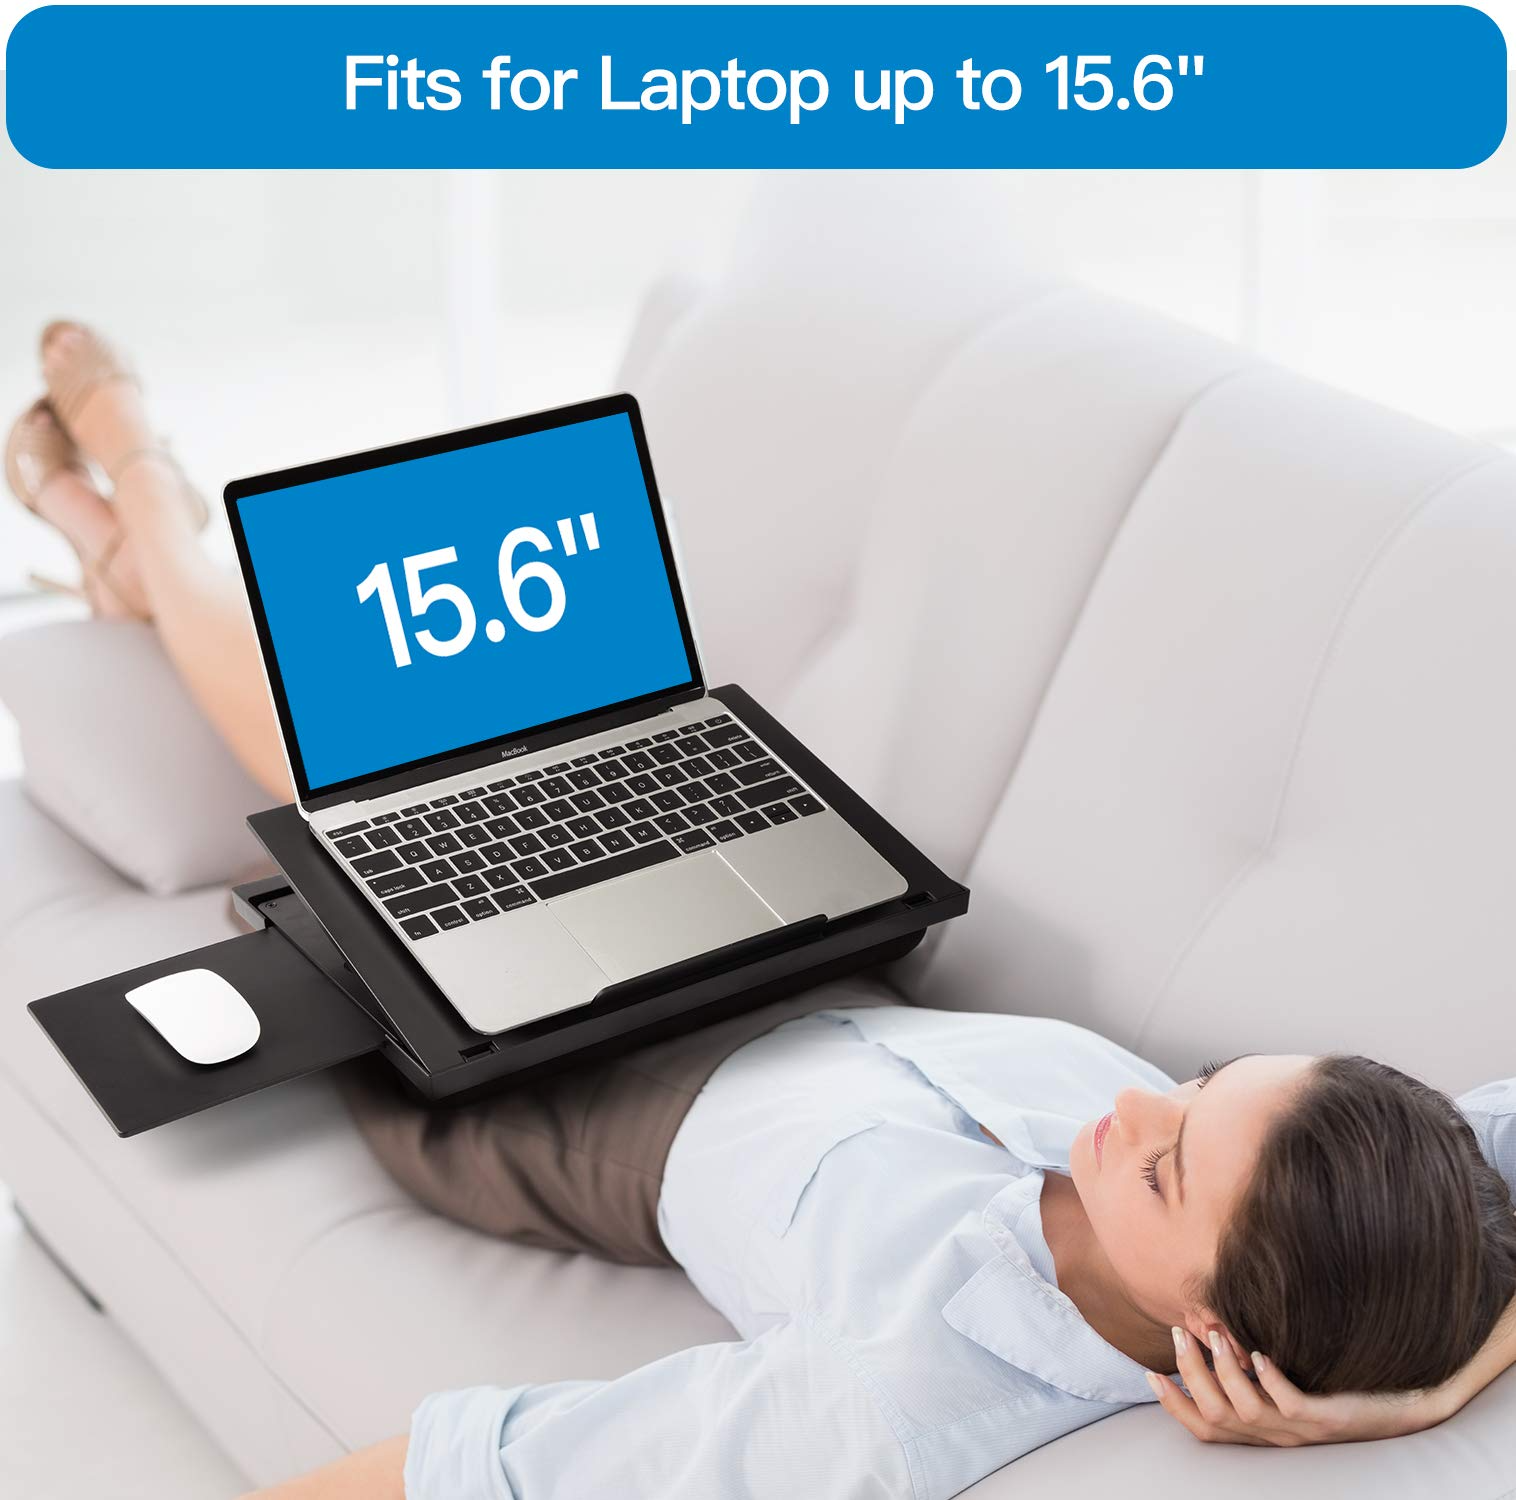 Adjustable Laptop Lap Desk Fits up to 15.6" with 6 Adjustable Angles, Detachable Mouse Pad, & Dual Cushions - image 4 of 8